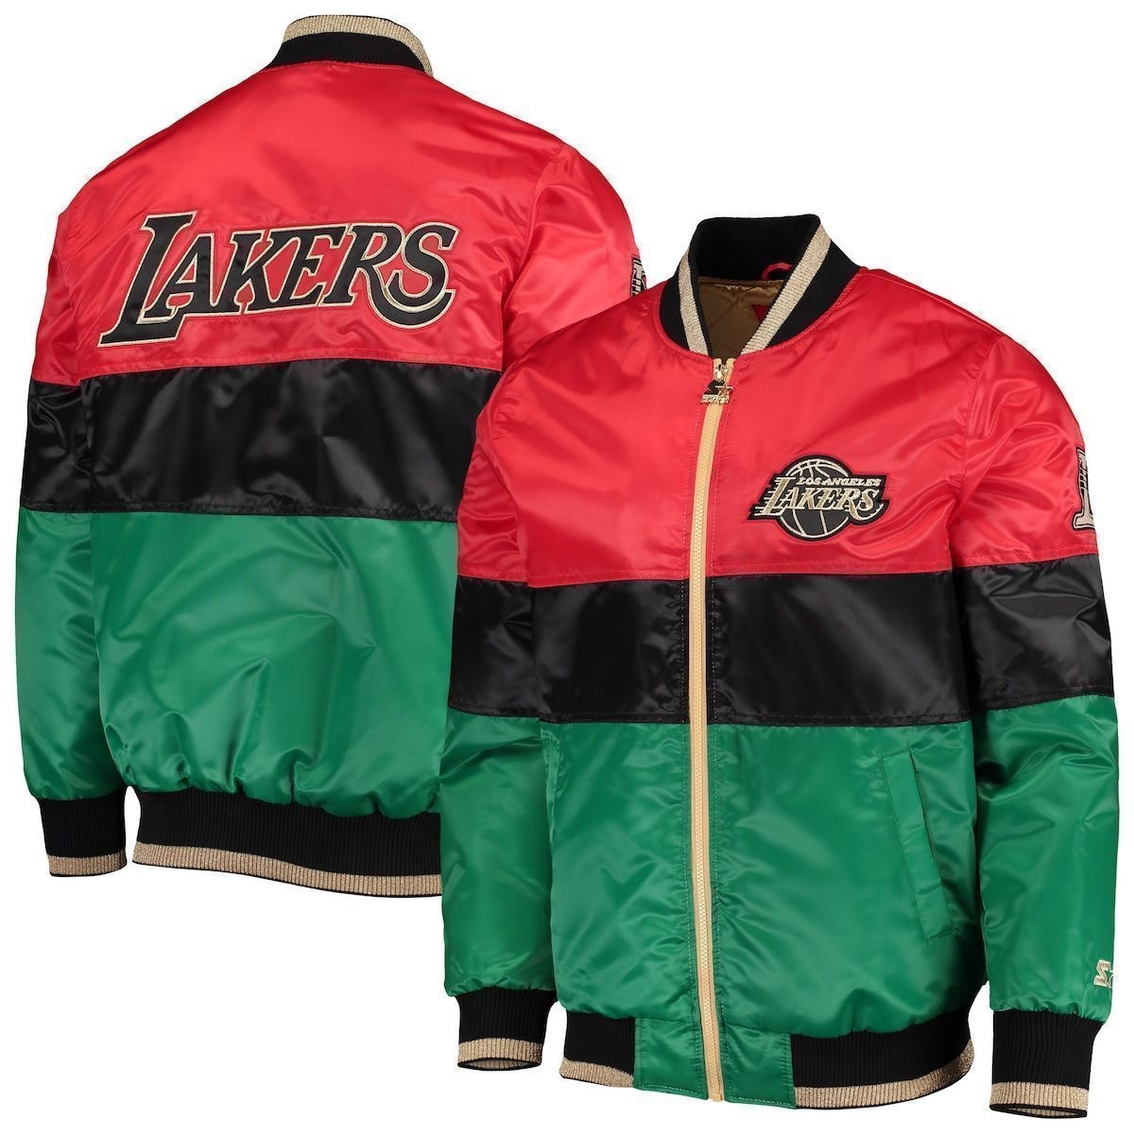 Starter Men's Red/Black/Green Los Angeles Lakers Black History Month NBA 75th Anniversary Full-Zip Jacket - Image 2 of 4